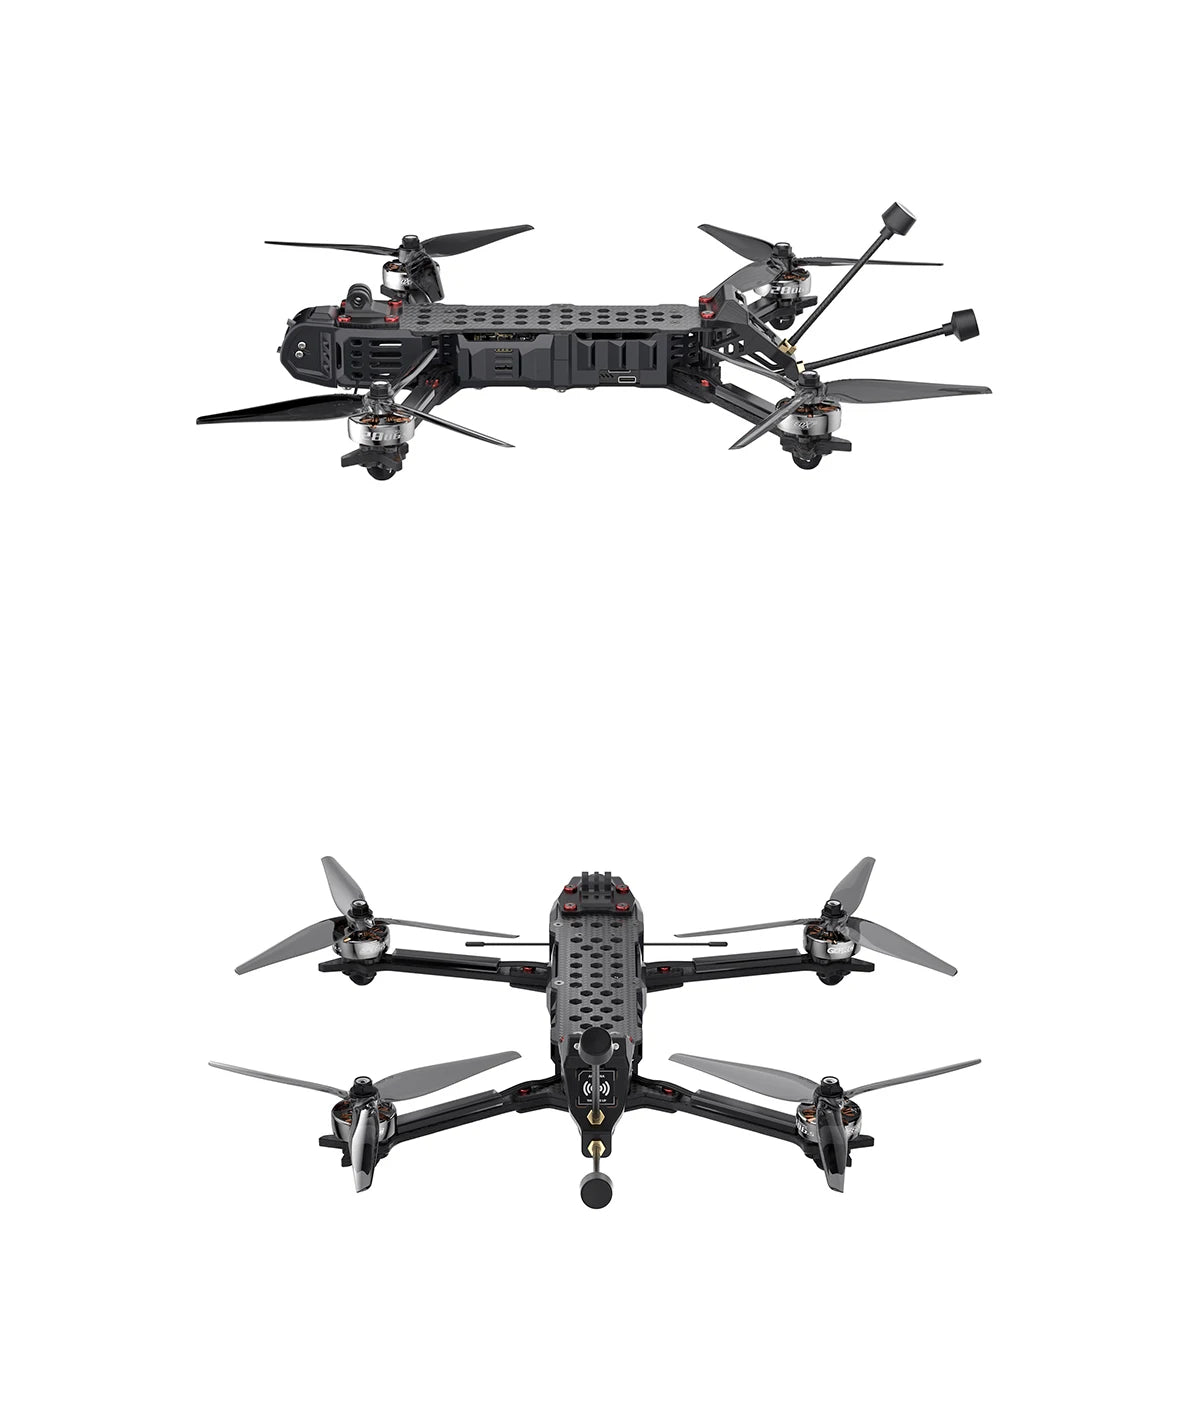 GEPRC Crocodile75 V3 HD, the high-performance long range FPV Crocodile75 V3 is officially released